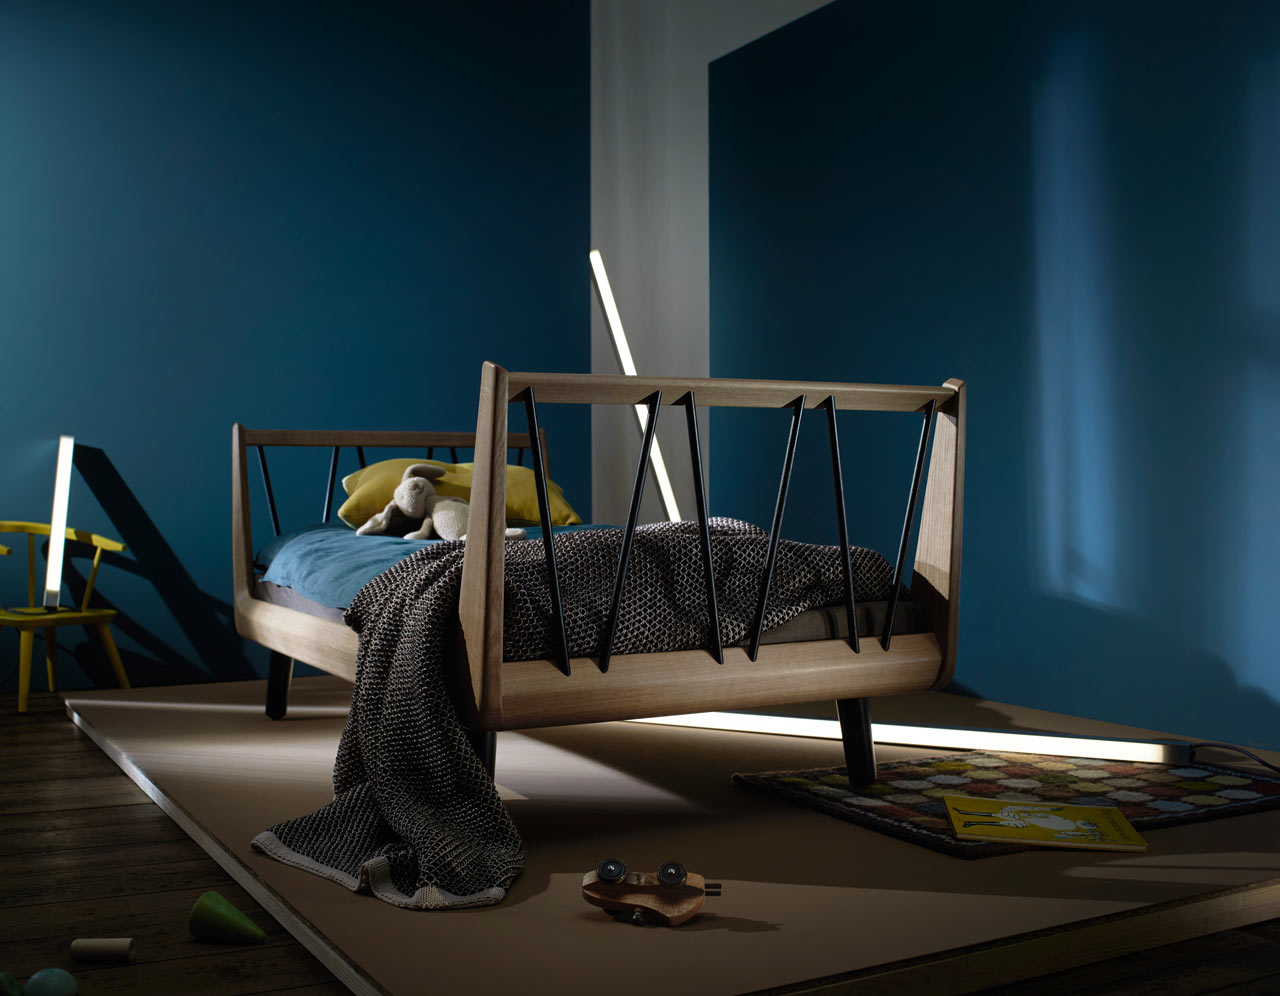 uuio Gives a New Spin on a Child’s Bed